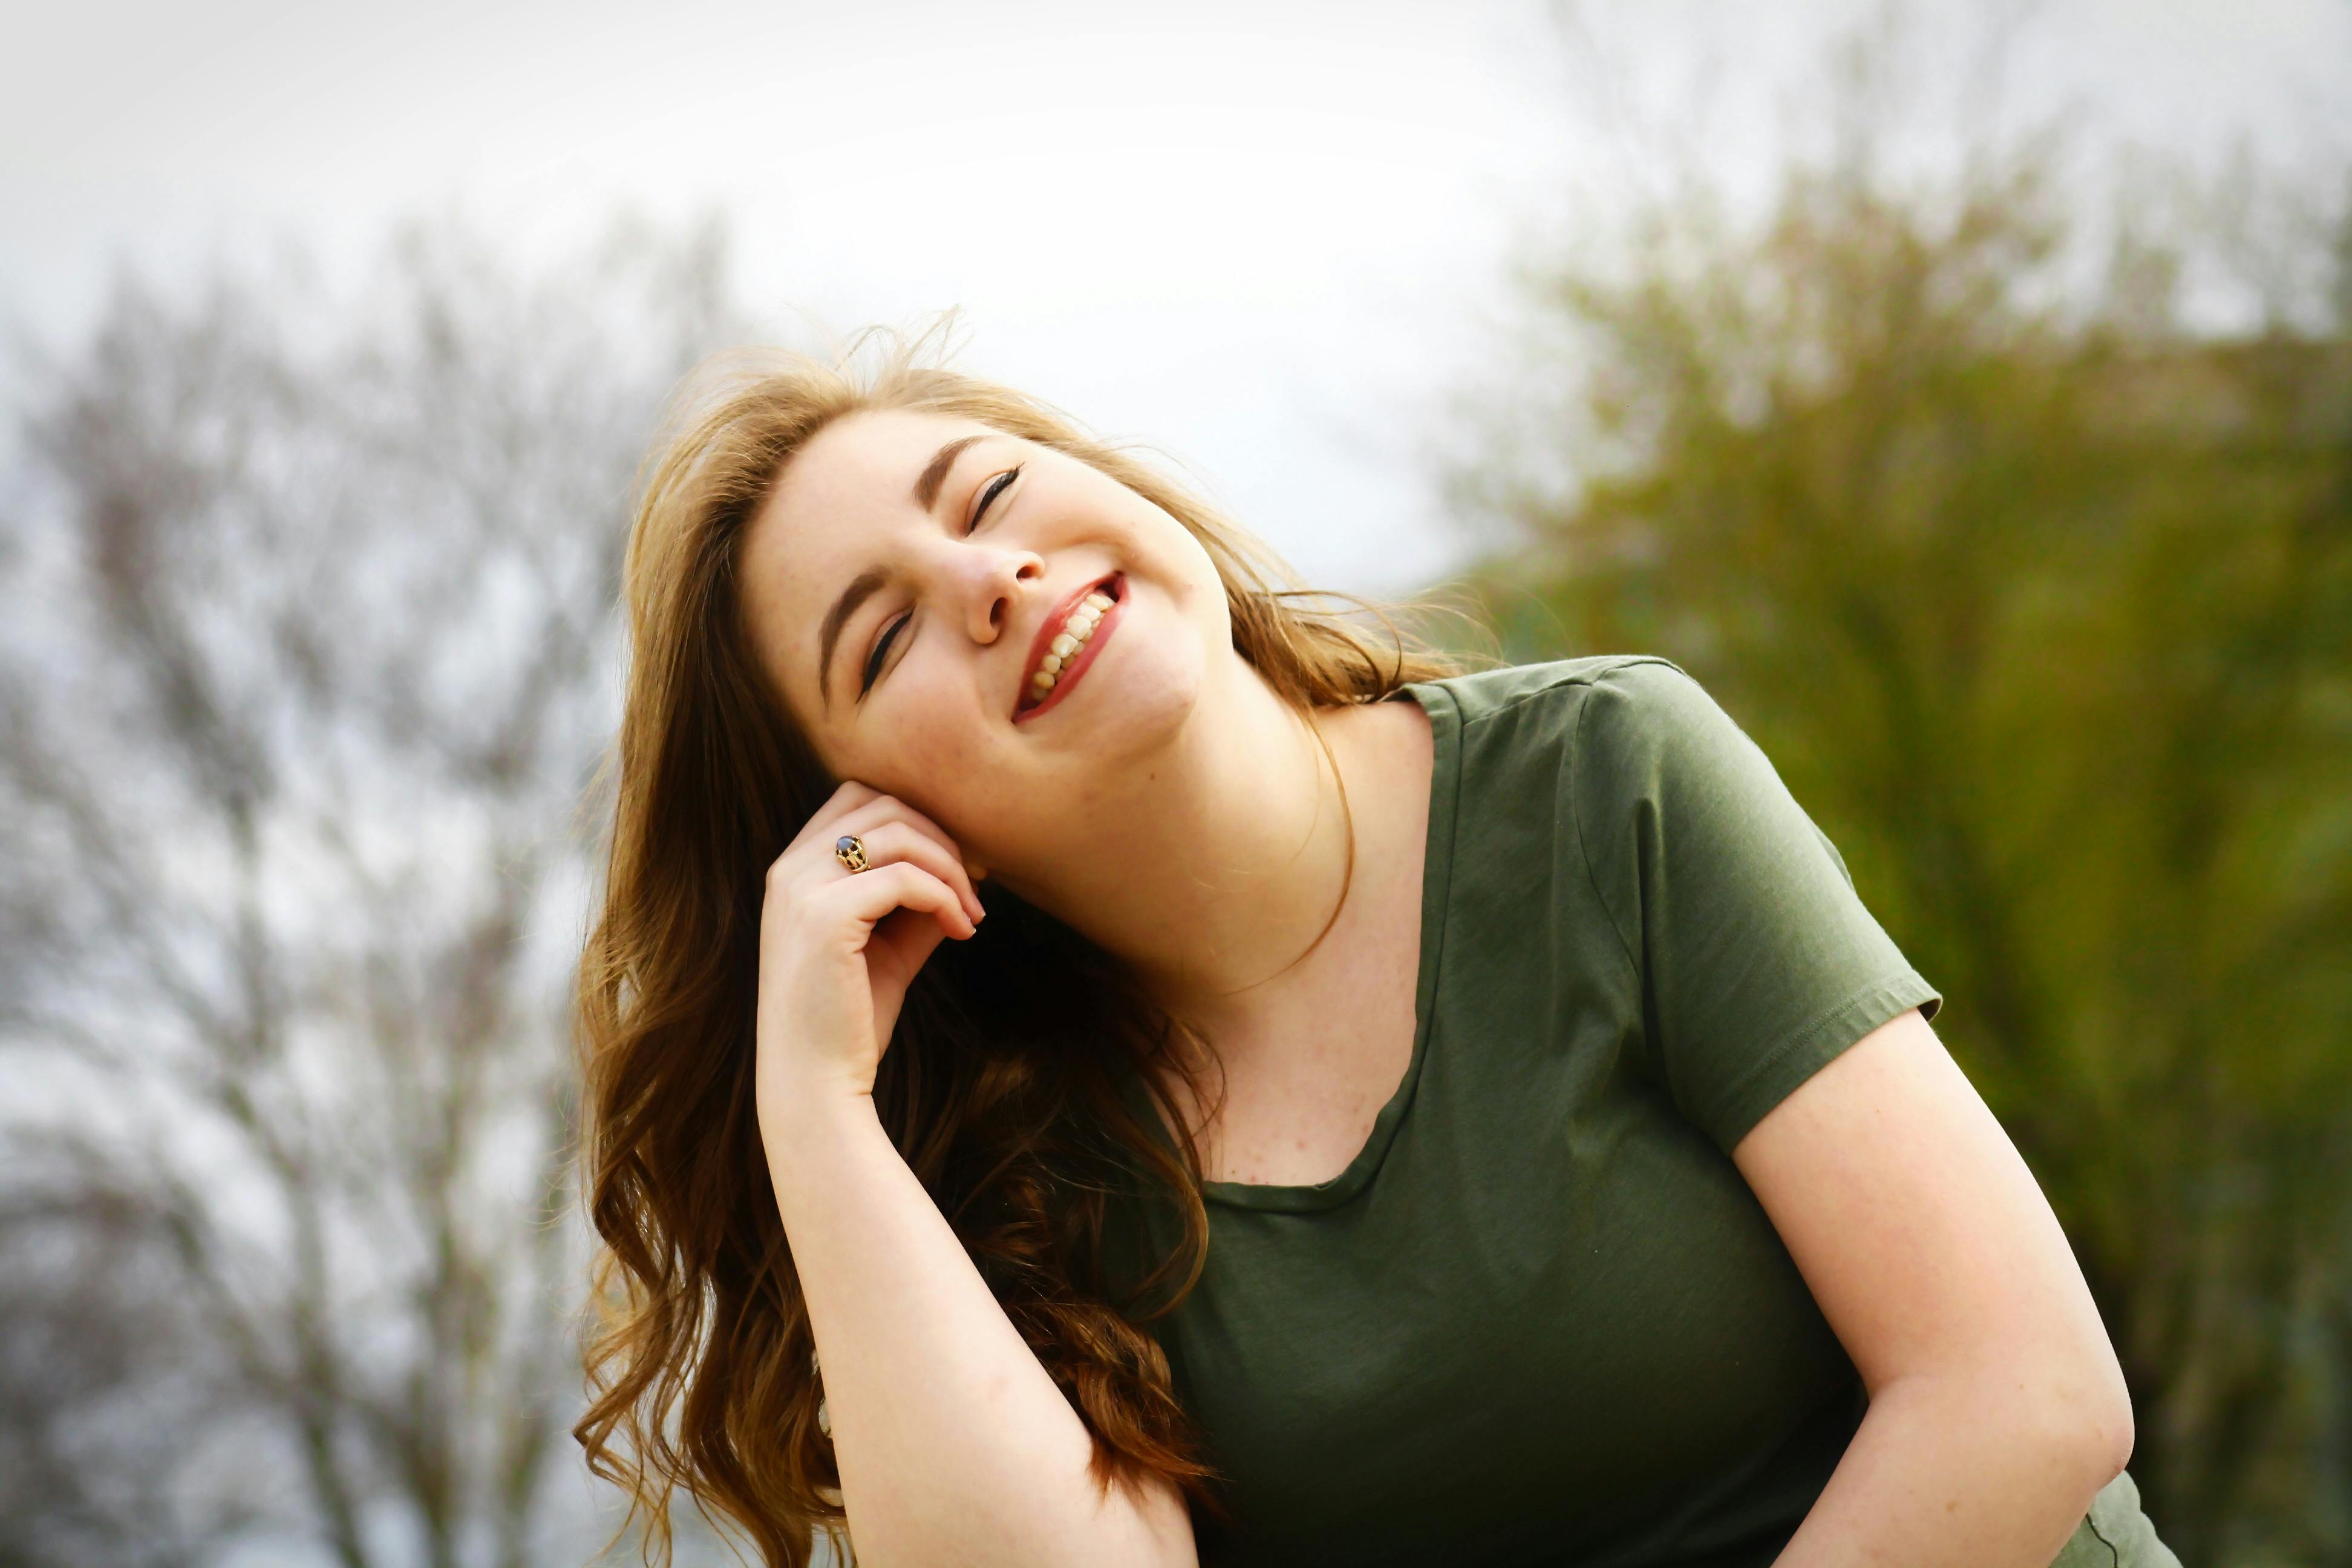 A happy woman smiling while enjoying the sun | Source: Pexels